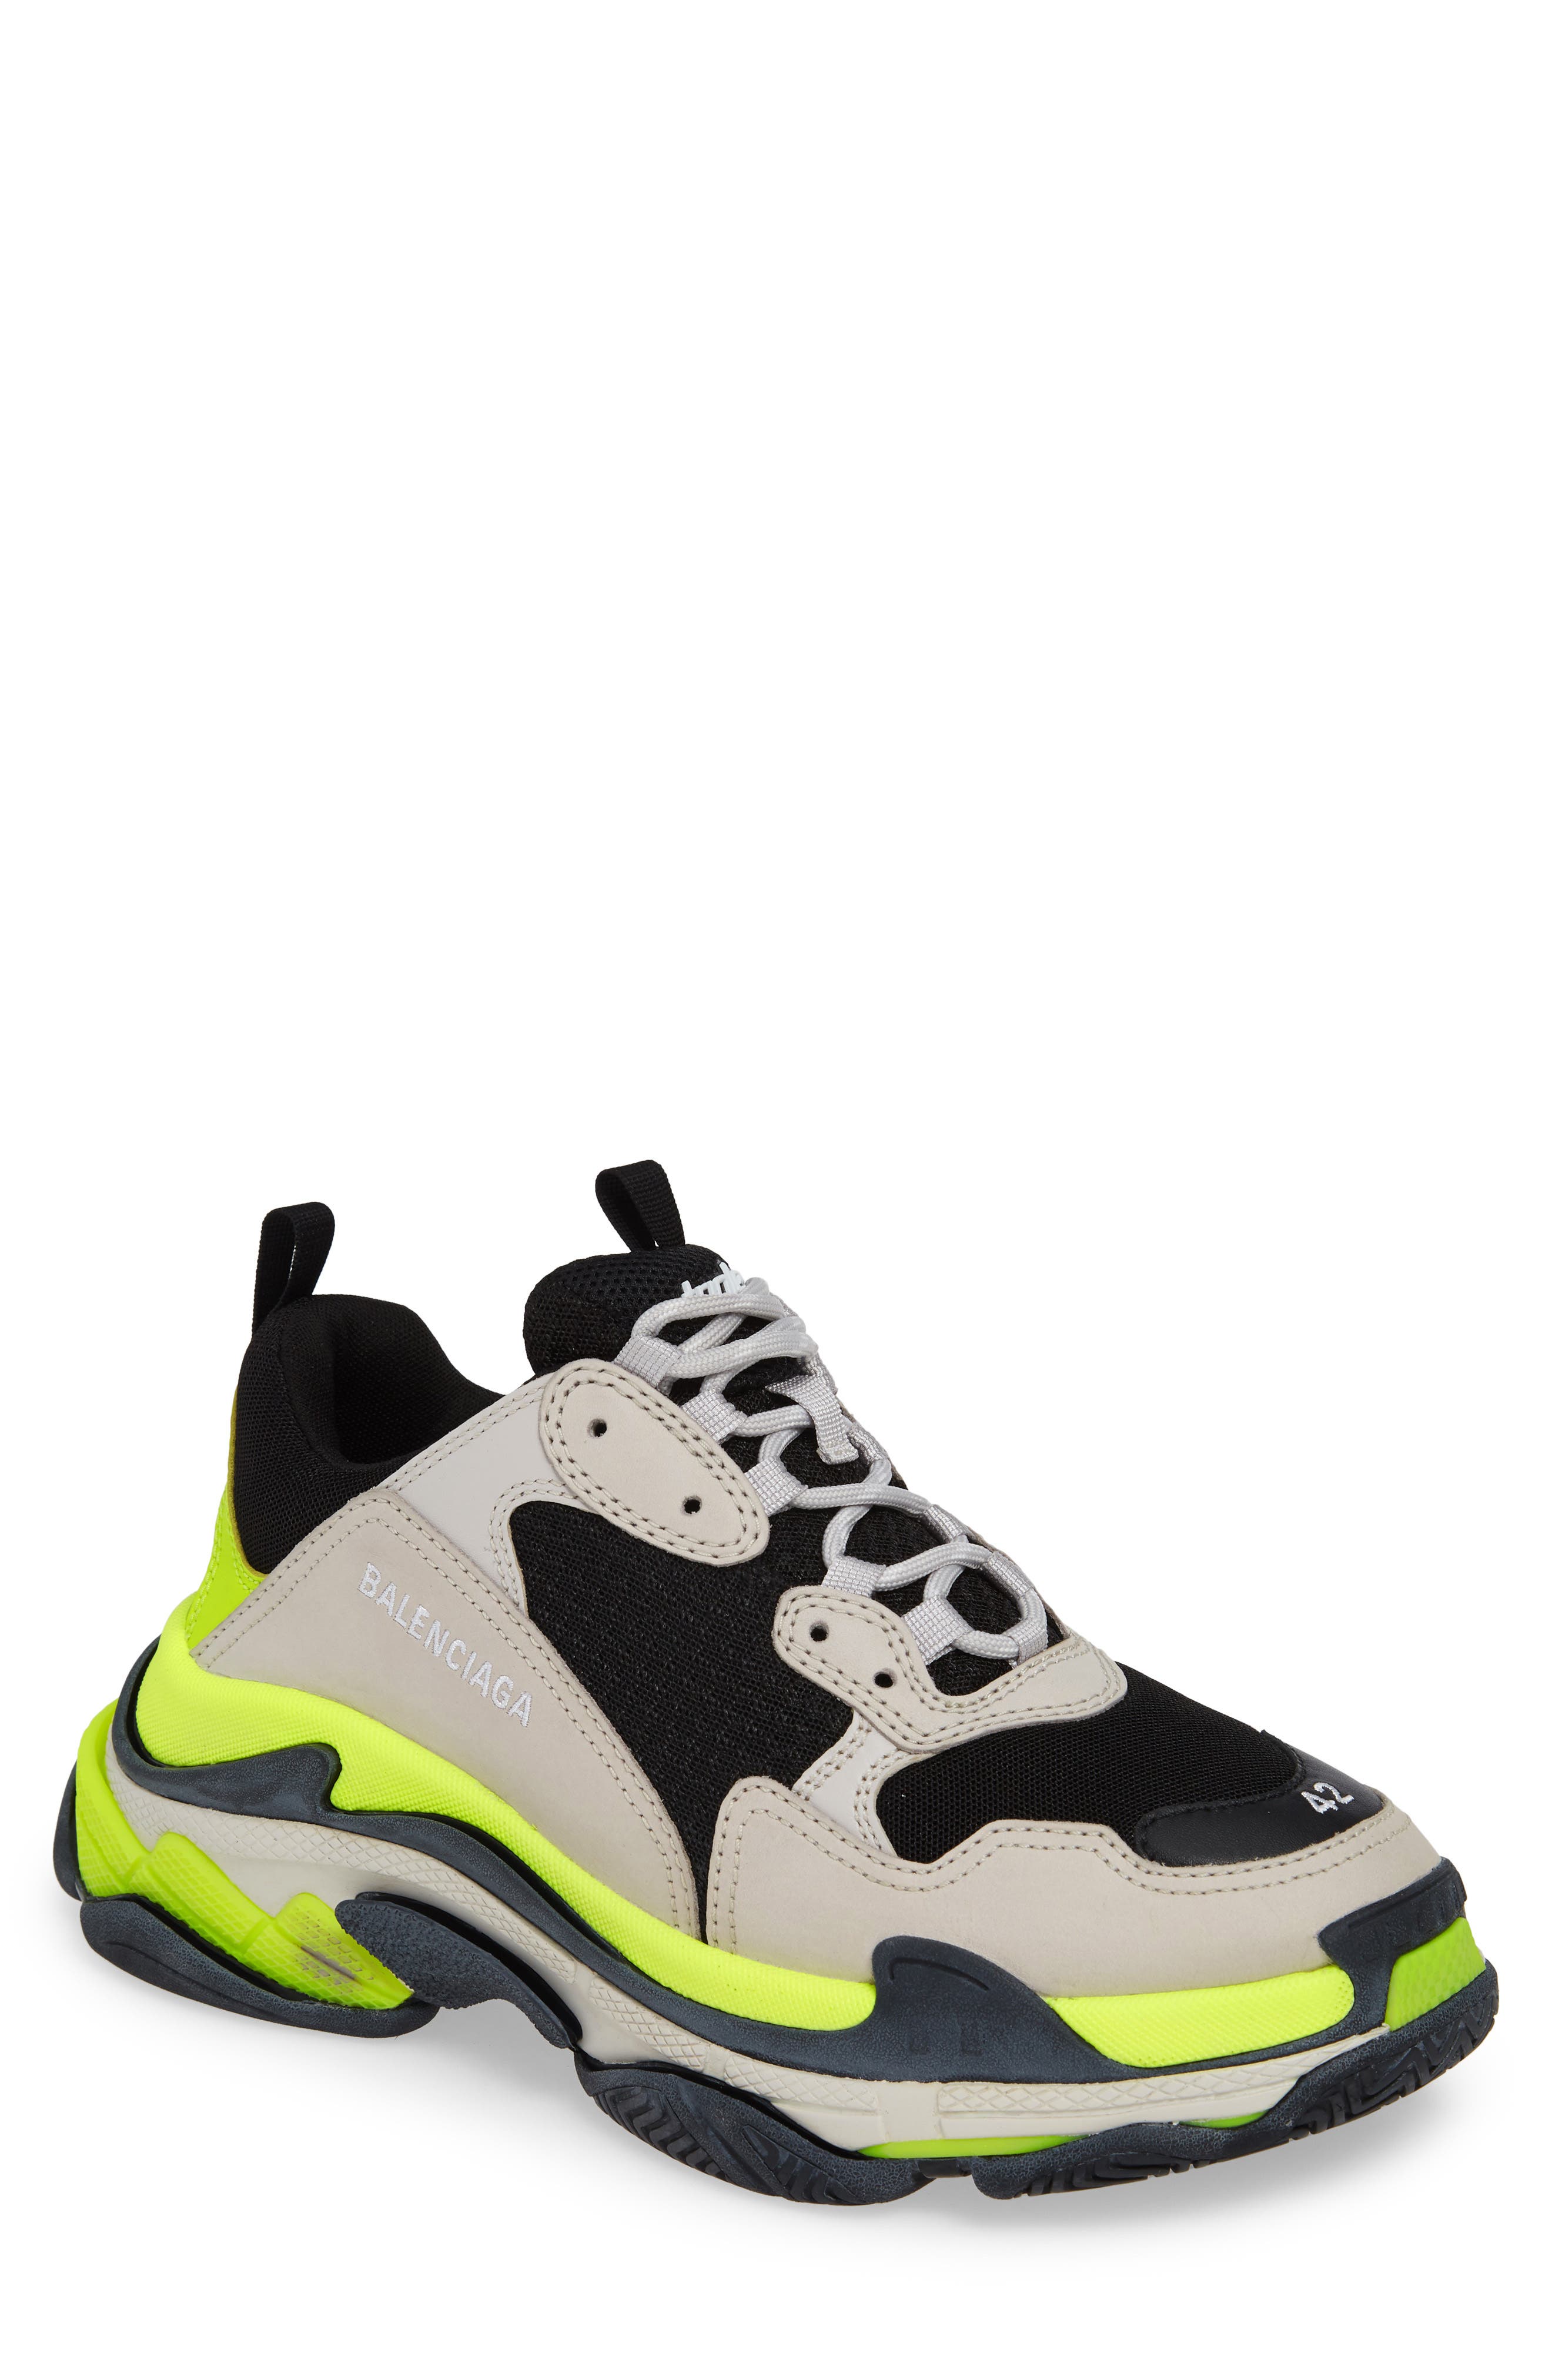 Balenciaga Triple S sneakers $850 liked on Polyvore